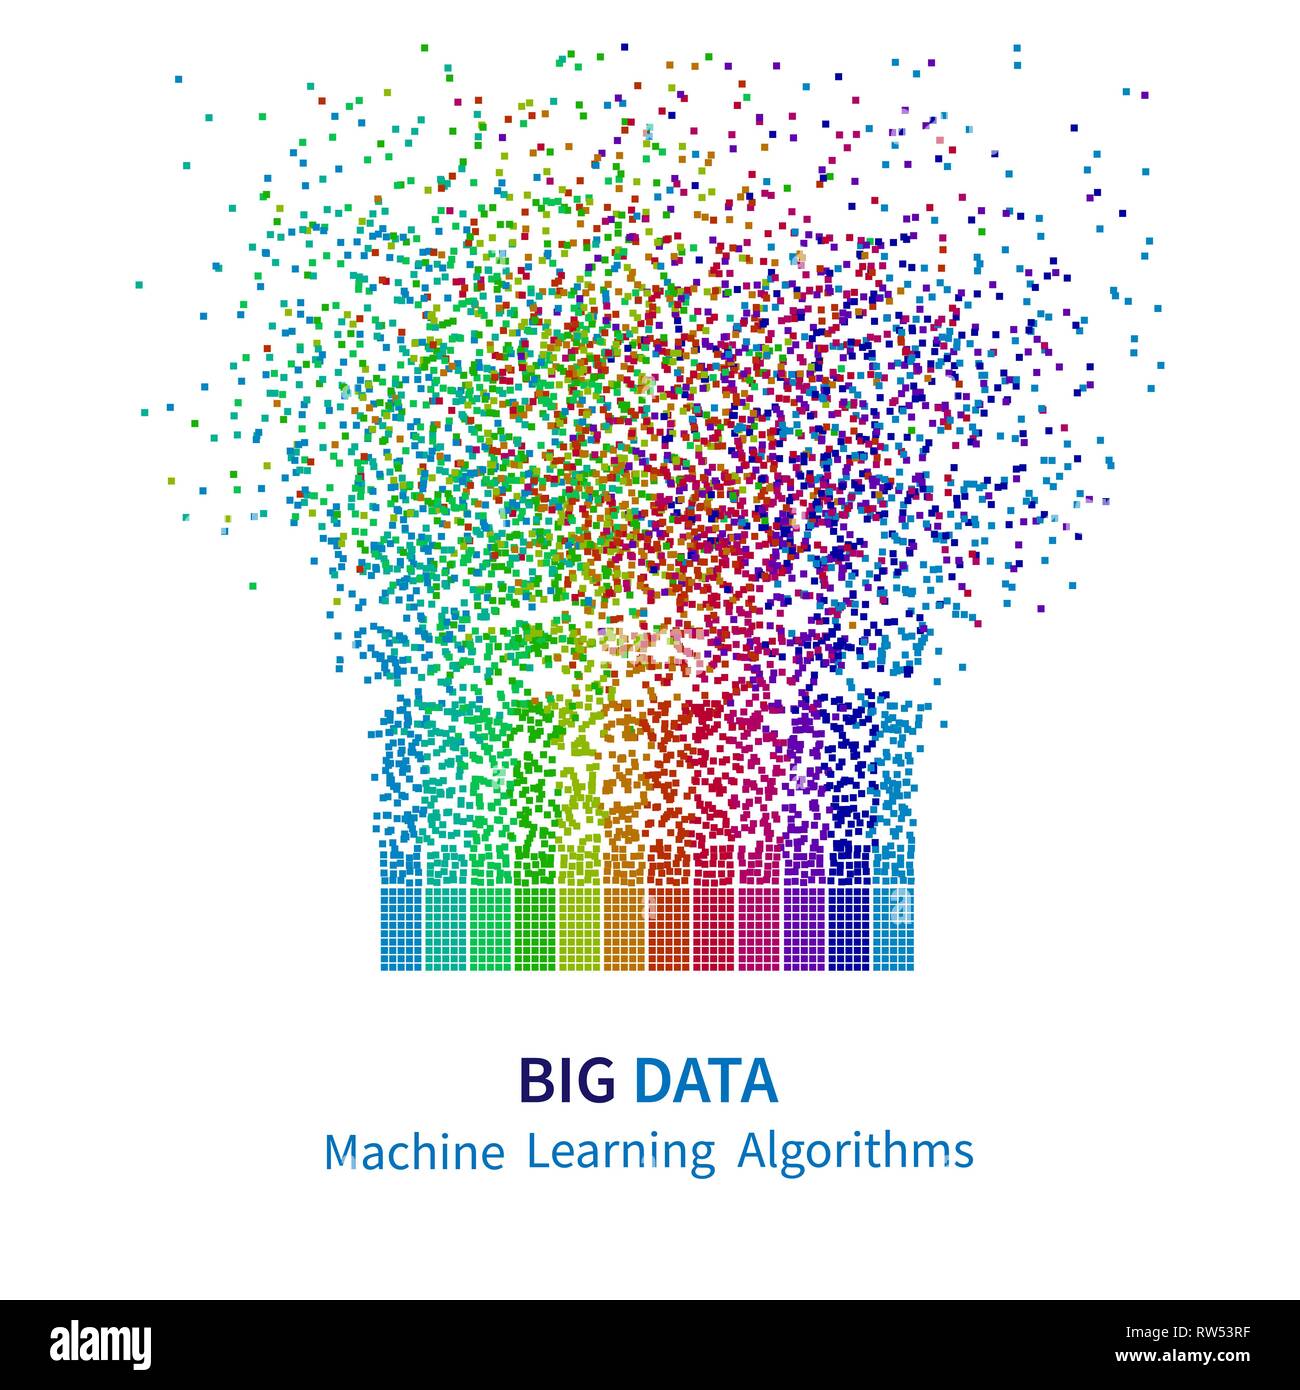 BIG DATA Machine Learning Algorithms. Analysis of Information Minimalistic Infographics Design. Science/Technology Background. Vector Illustration. Stock Vector